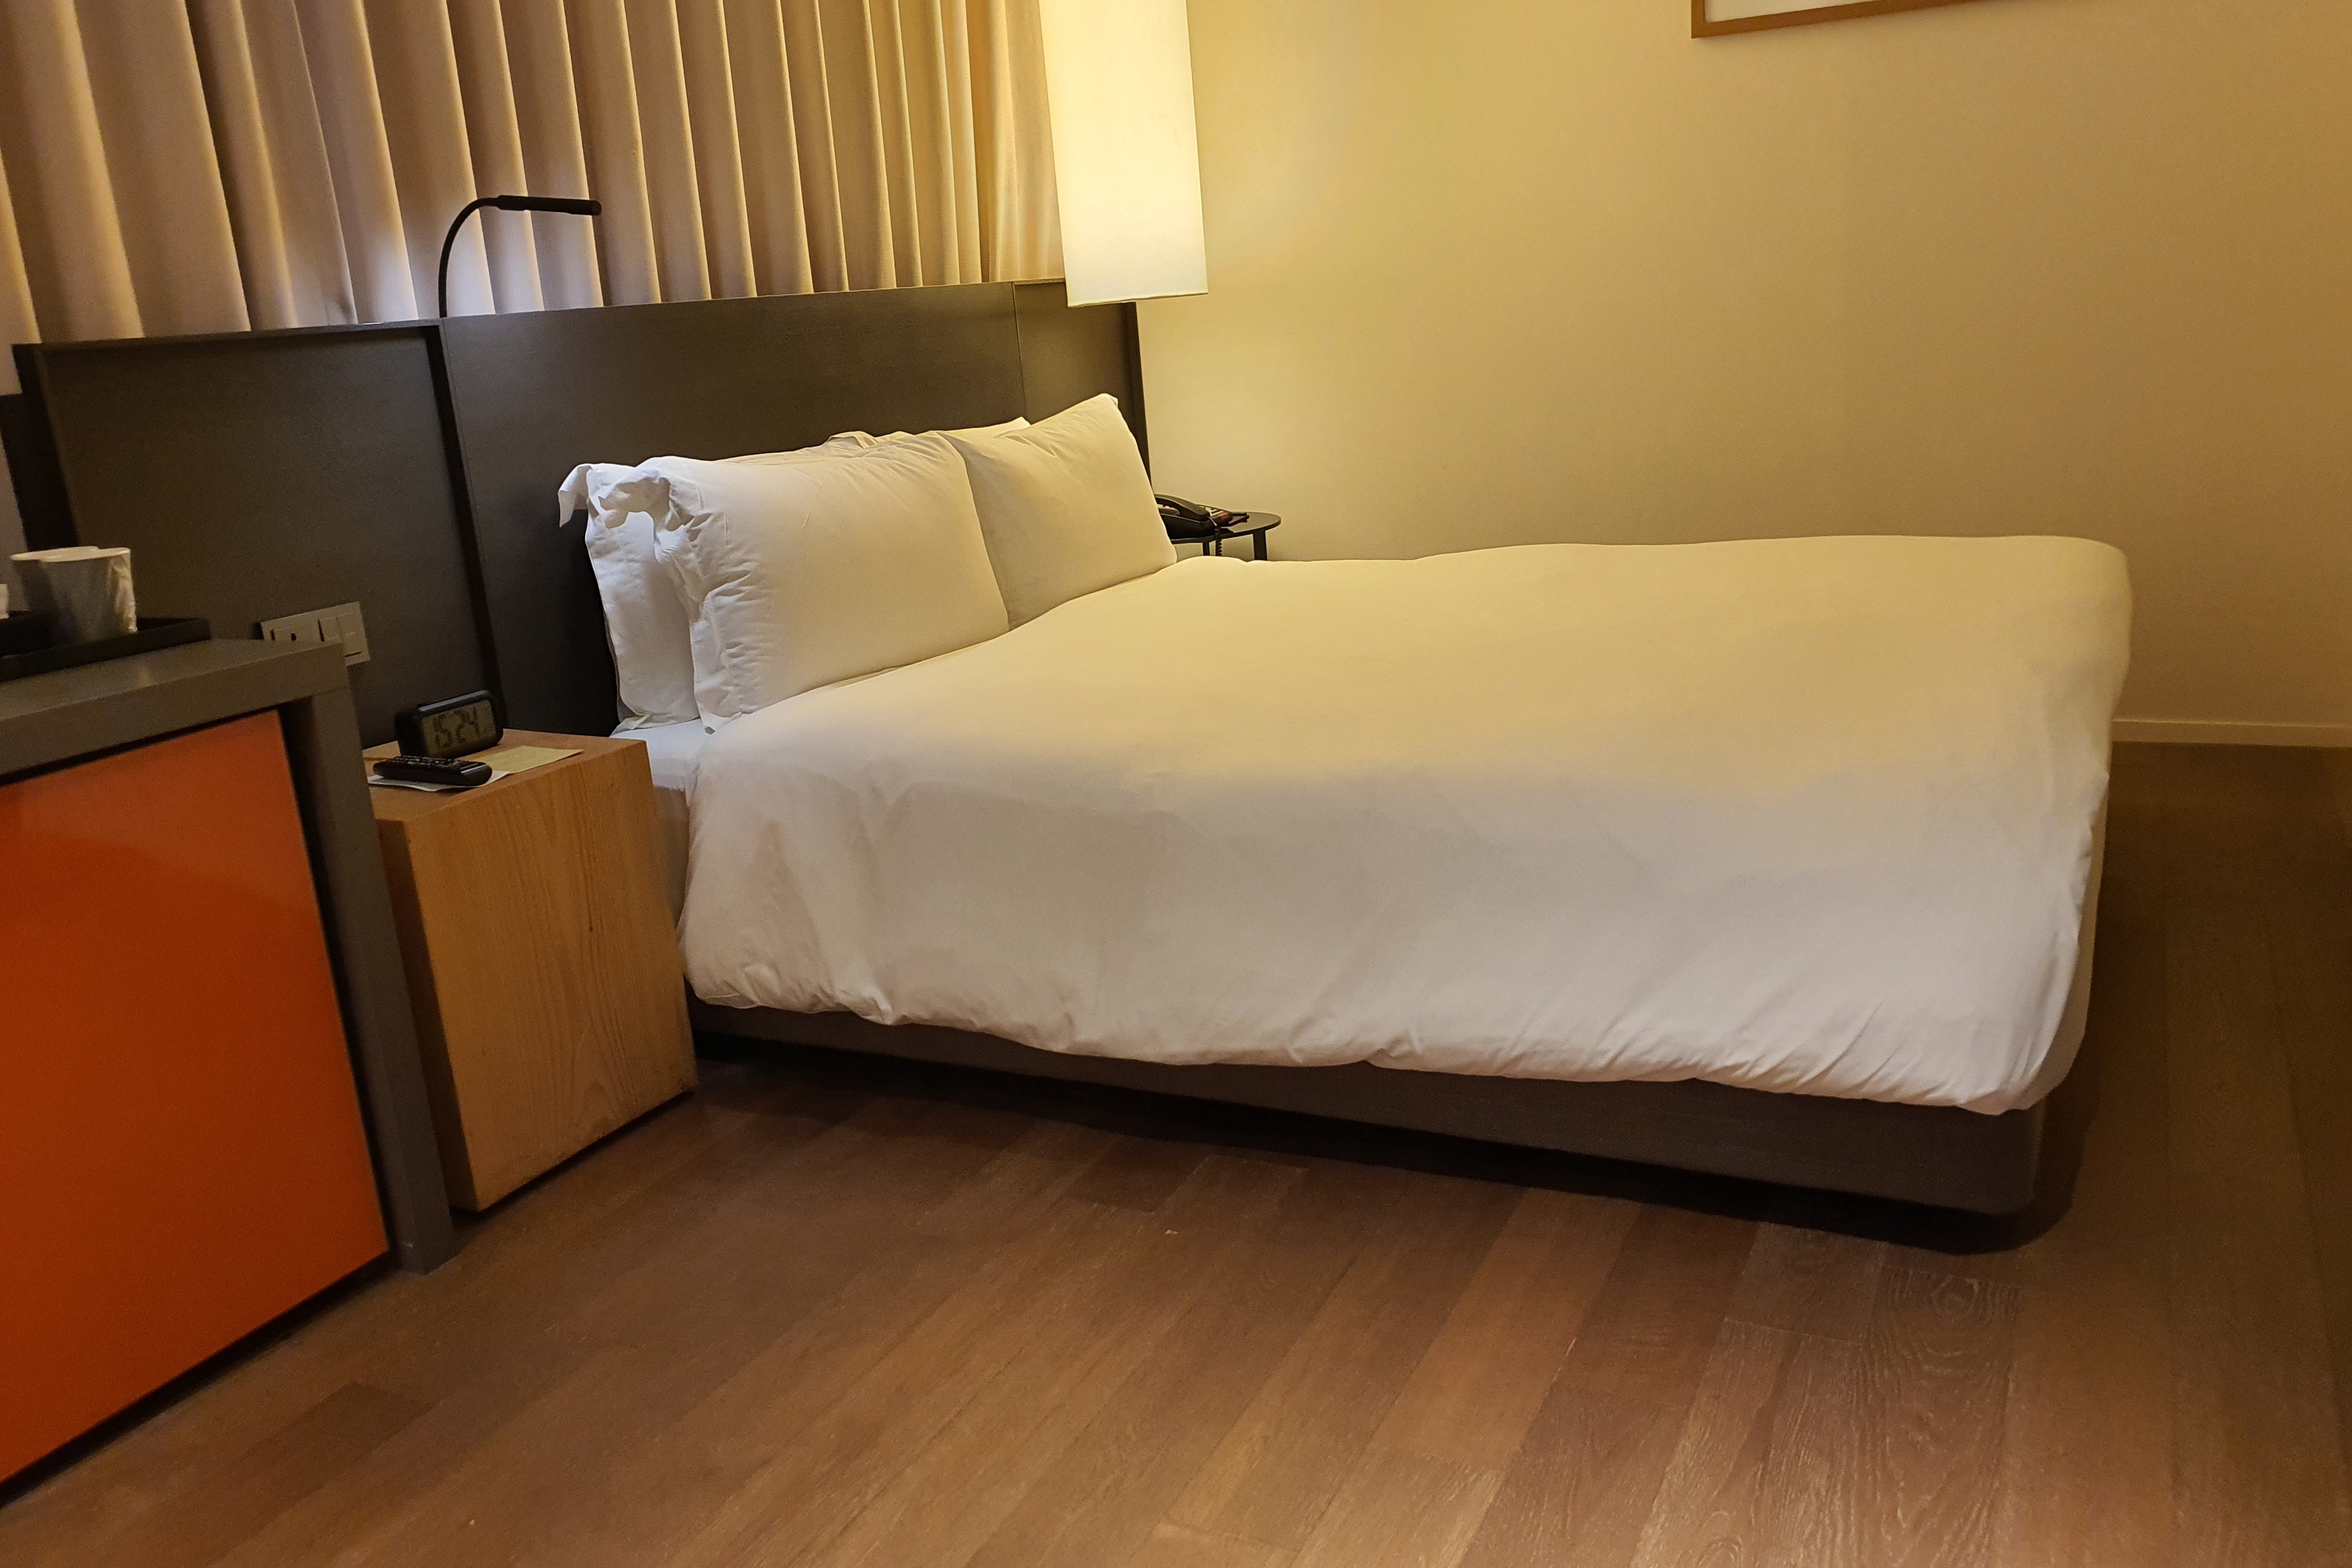 Accessible guestroom0 : A neat and modern guestroom